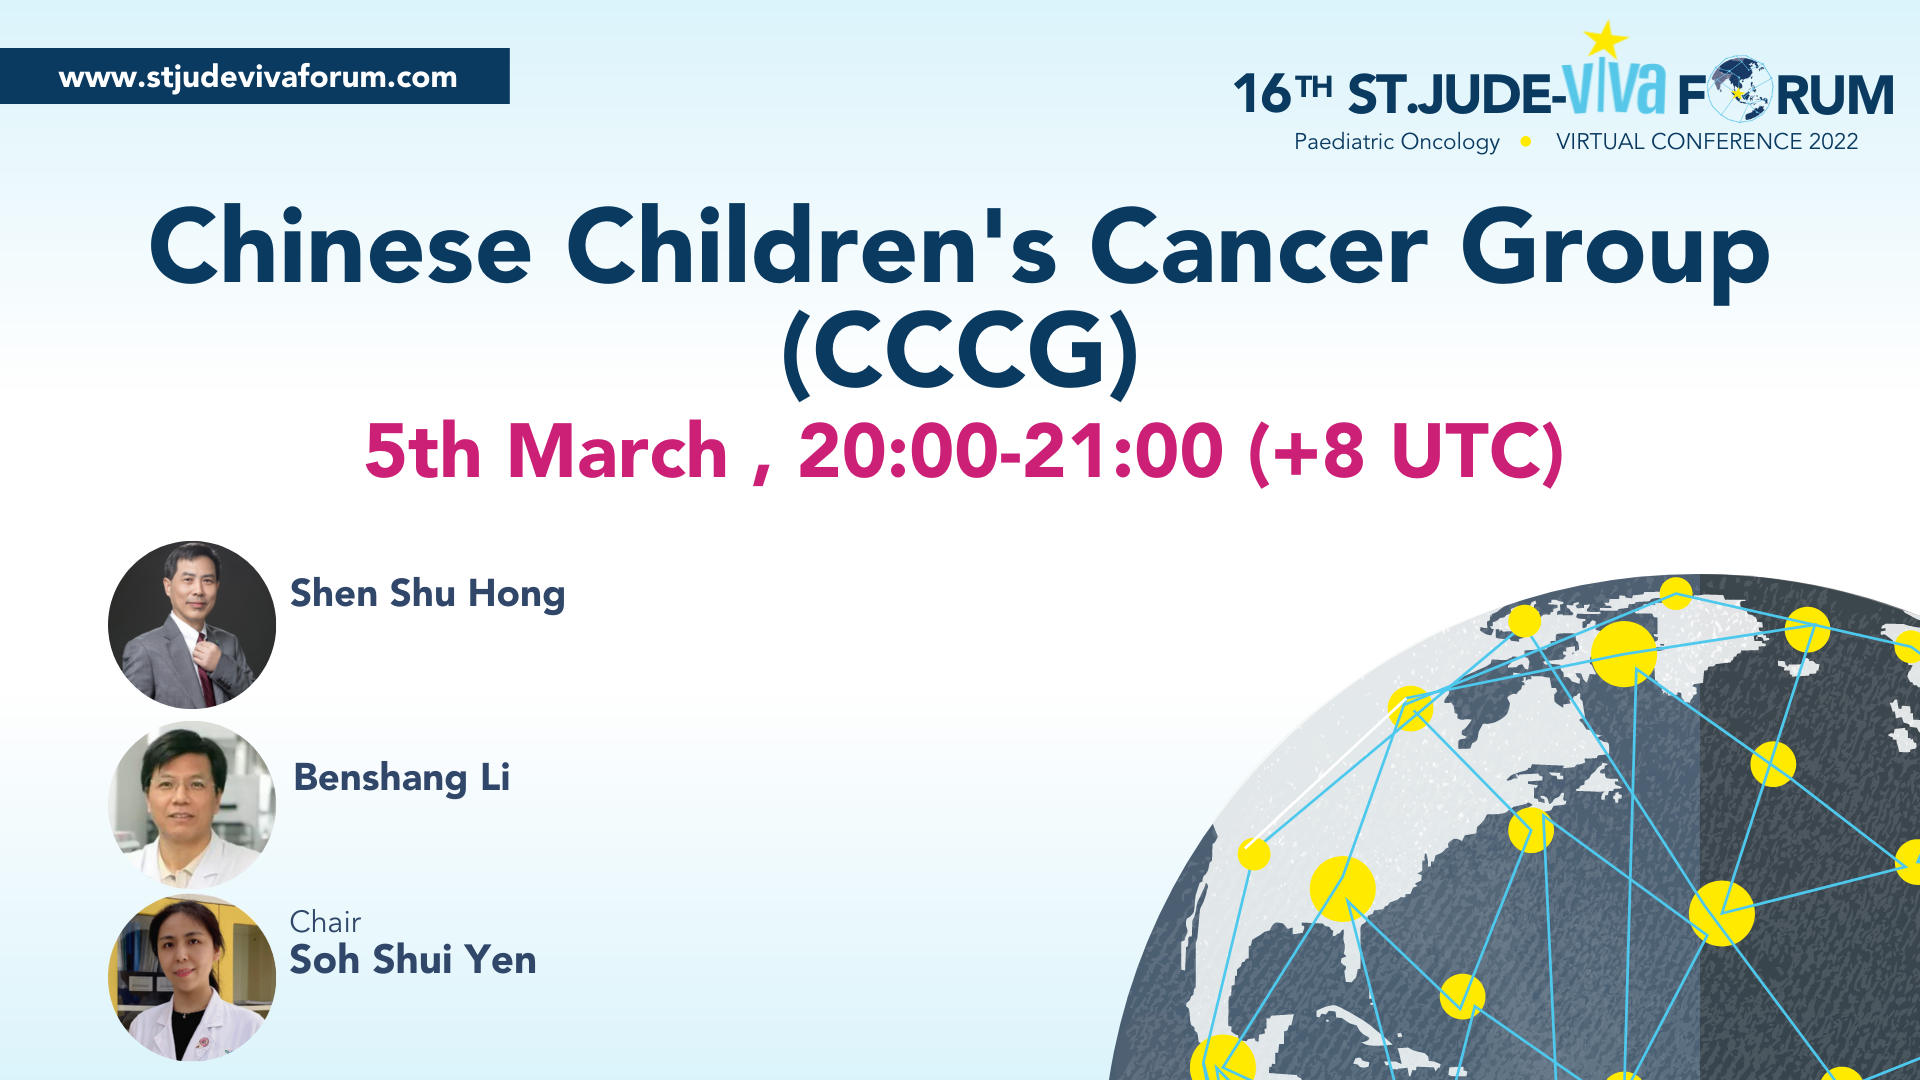 This series is an important milestone in pediatric oncology and to my knowledge there has never been such a comprehensive course like this before to date. Thank you Dr Hudson for making this landmark event 1